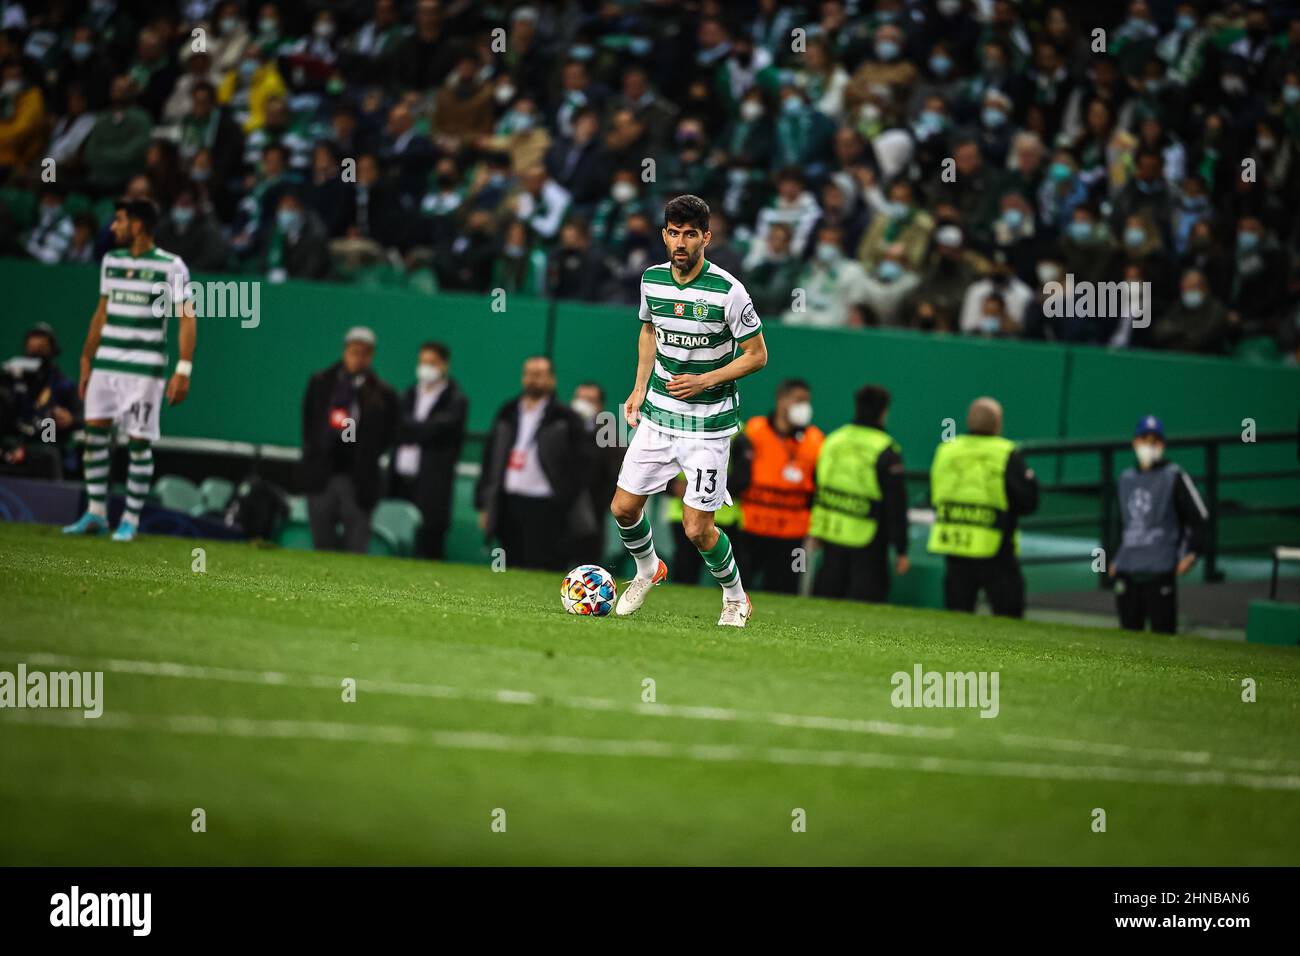 Lisbon, Portugal. 15th Feb, 2022. Lisbon, Portugal, Feb 15th 2022 LUIS NETO OF SPORTING during the UEFA Champions League game between Sporting Lisbon and Manchester City at the Estadio Jose Alvalade in Lisbon Portugal Pedro Loureiro/SPP Credit: SPP Sport Press Photo. /Alamy Live News Stock Photo